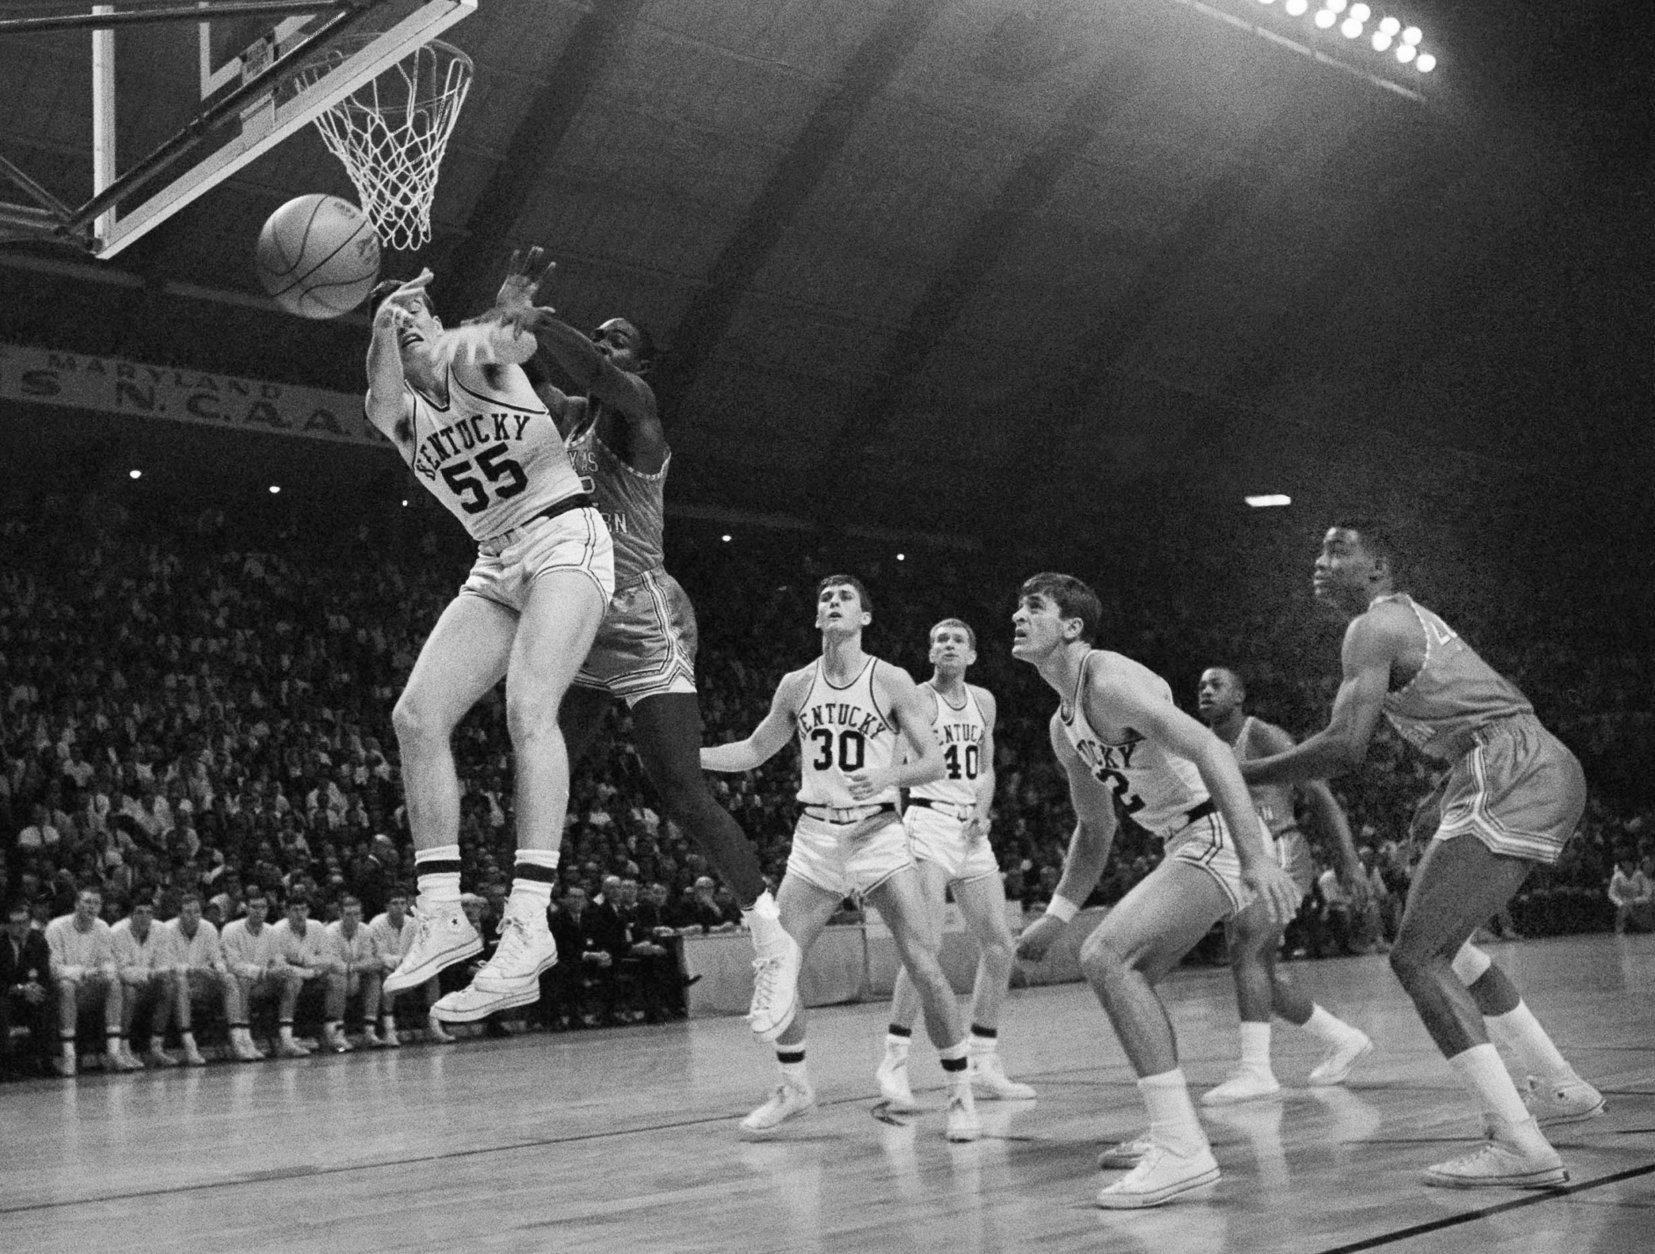 FILE - In this March 19, 1966, file photo, Kentucky's Thad Jaracz (55) and Texas Western's David Latin (42) reach for a rebound during the first period of the NCAA men's baksetball championship game in College Park, Md. Other Kentucky players shown are Tommy Kron (30) and Larry Conley (40). Fifty years ago, Texas Western started five blacksWillie Worsley, Orsten Artis, Bobby Joe Hill, David "Big Daddy" Lattin and Harry Flournoyagainst Kentucky in the game. Today, after reading historical recaps and watching movies, people tend to think it was an immediate watershed moment in sports and civil rights. It wasn't. (AP Photo/File)